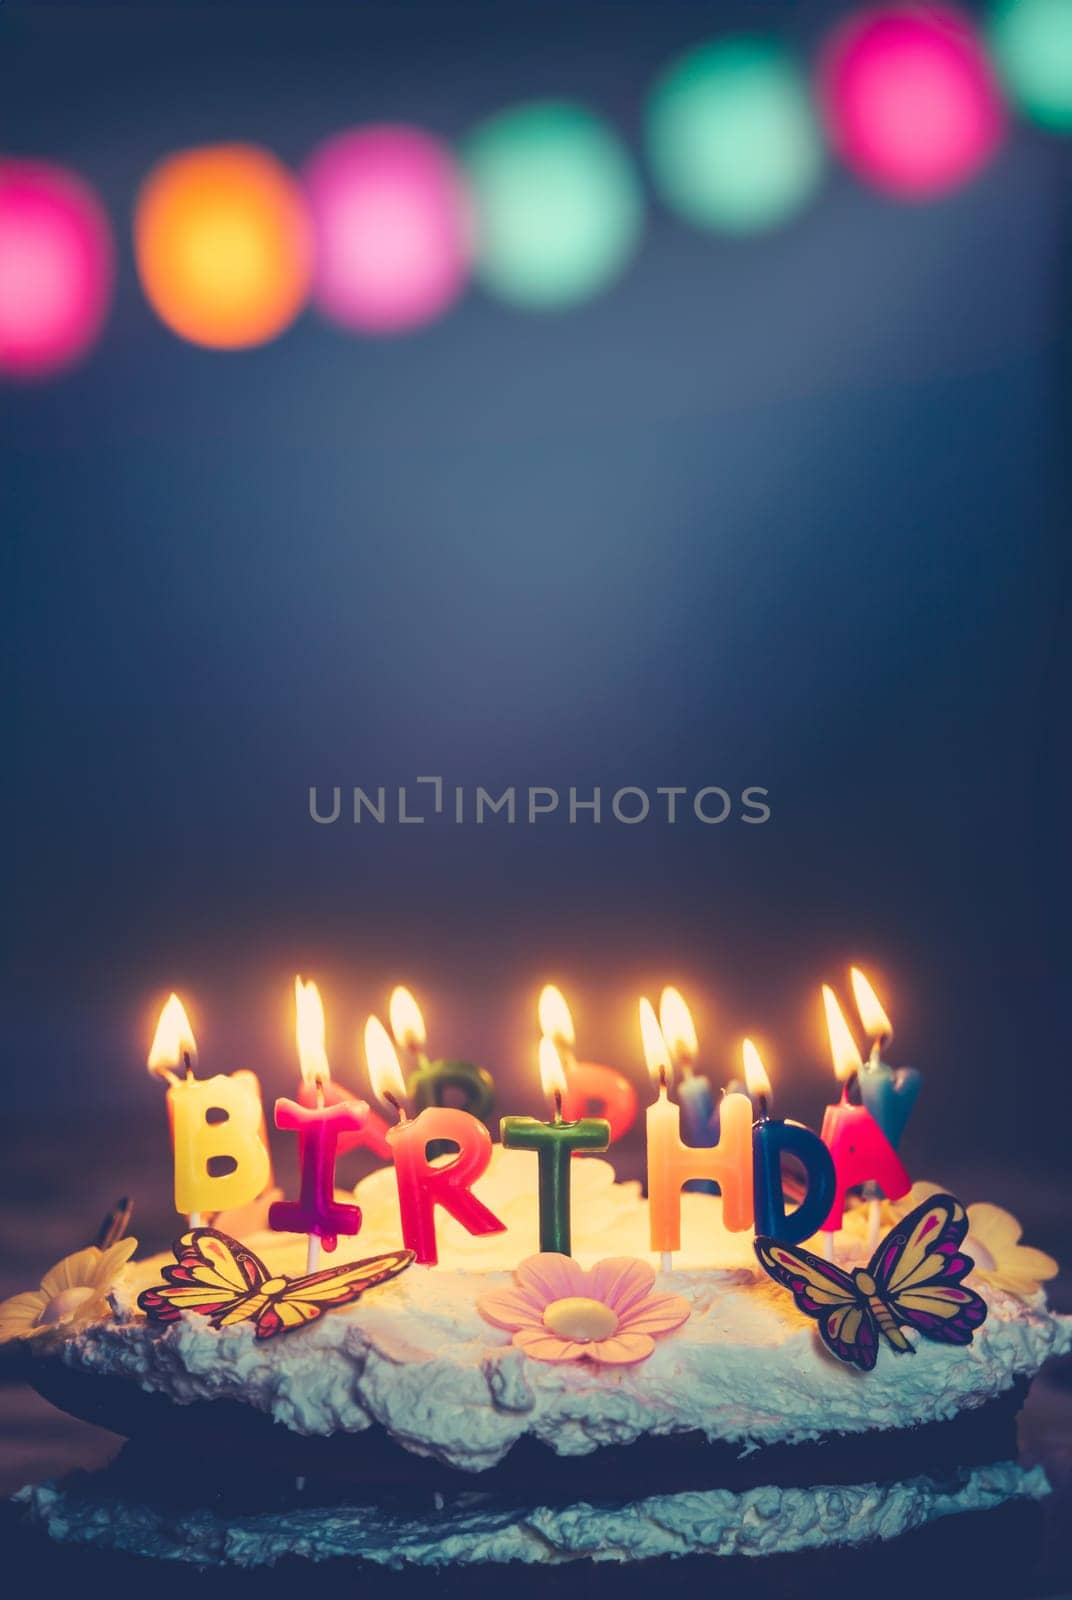 A Birthday Cake With Happy Birthday Candles And Fairy Lights And Copy Space